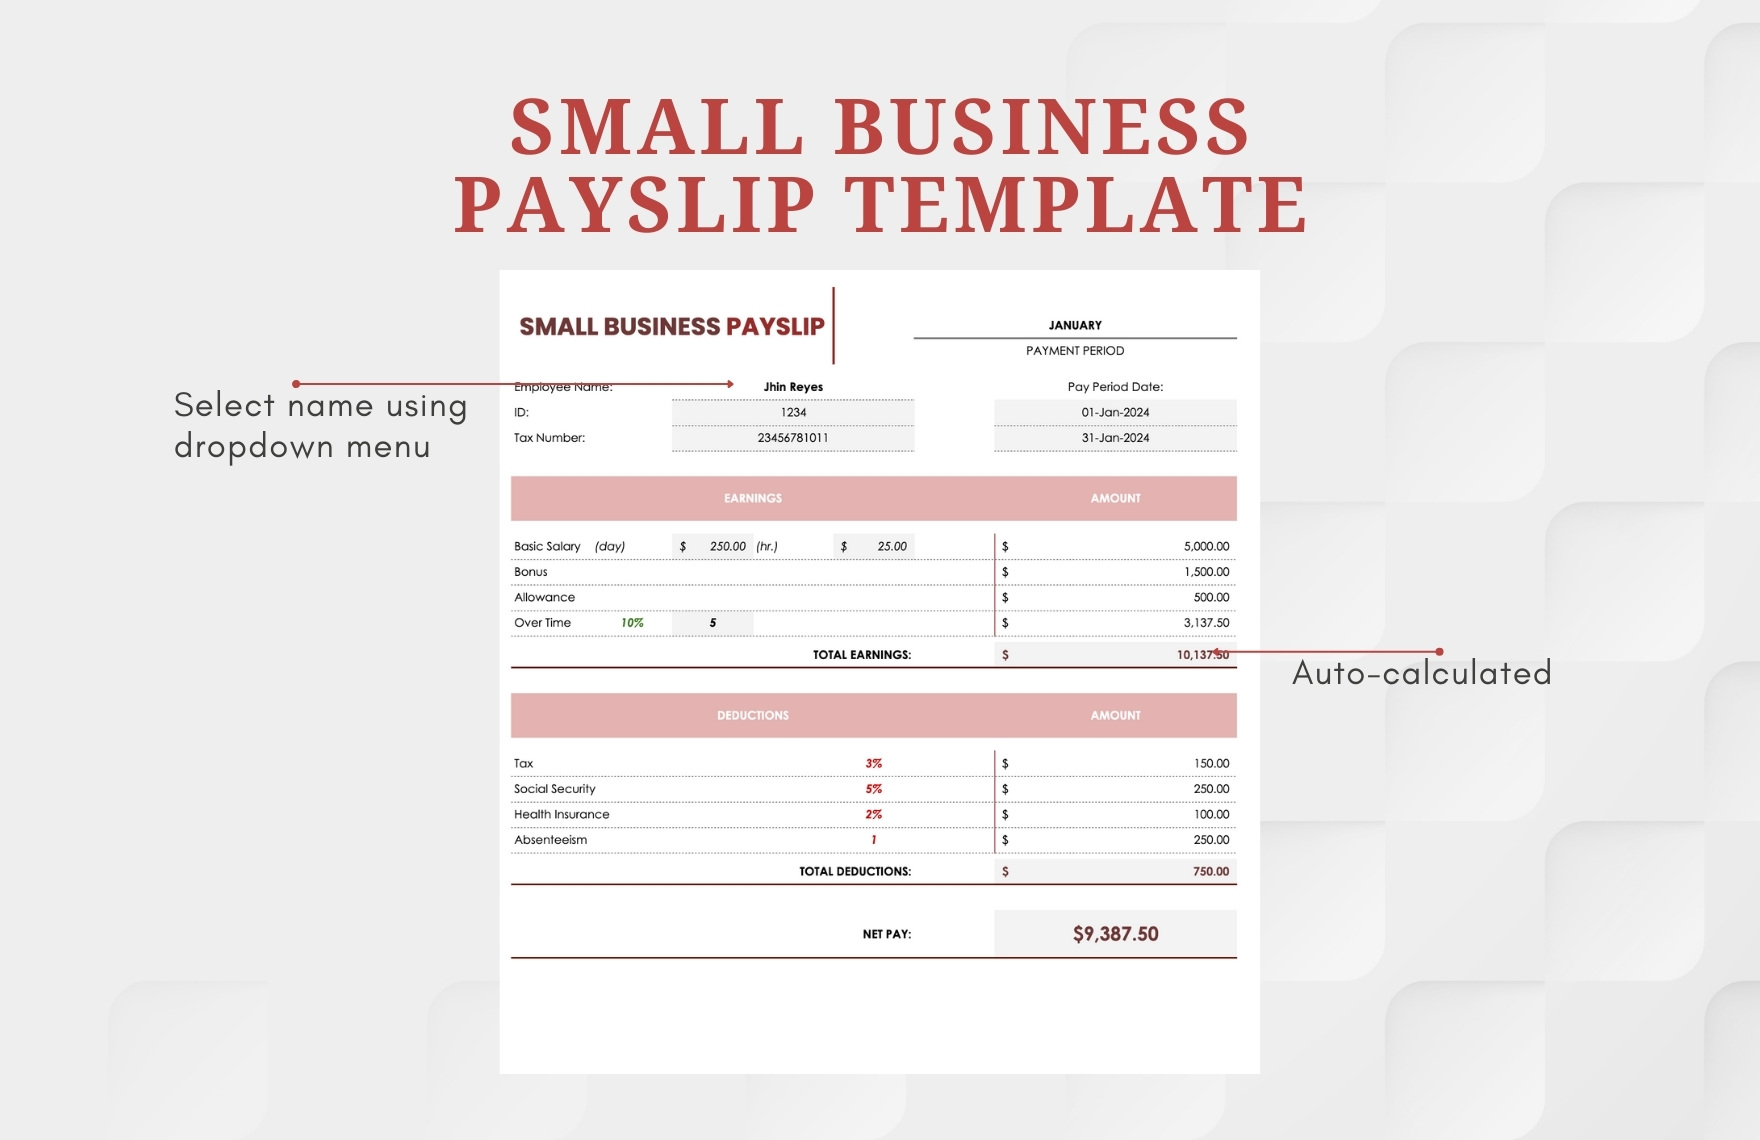 Small Business Payslip Template